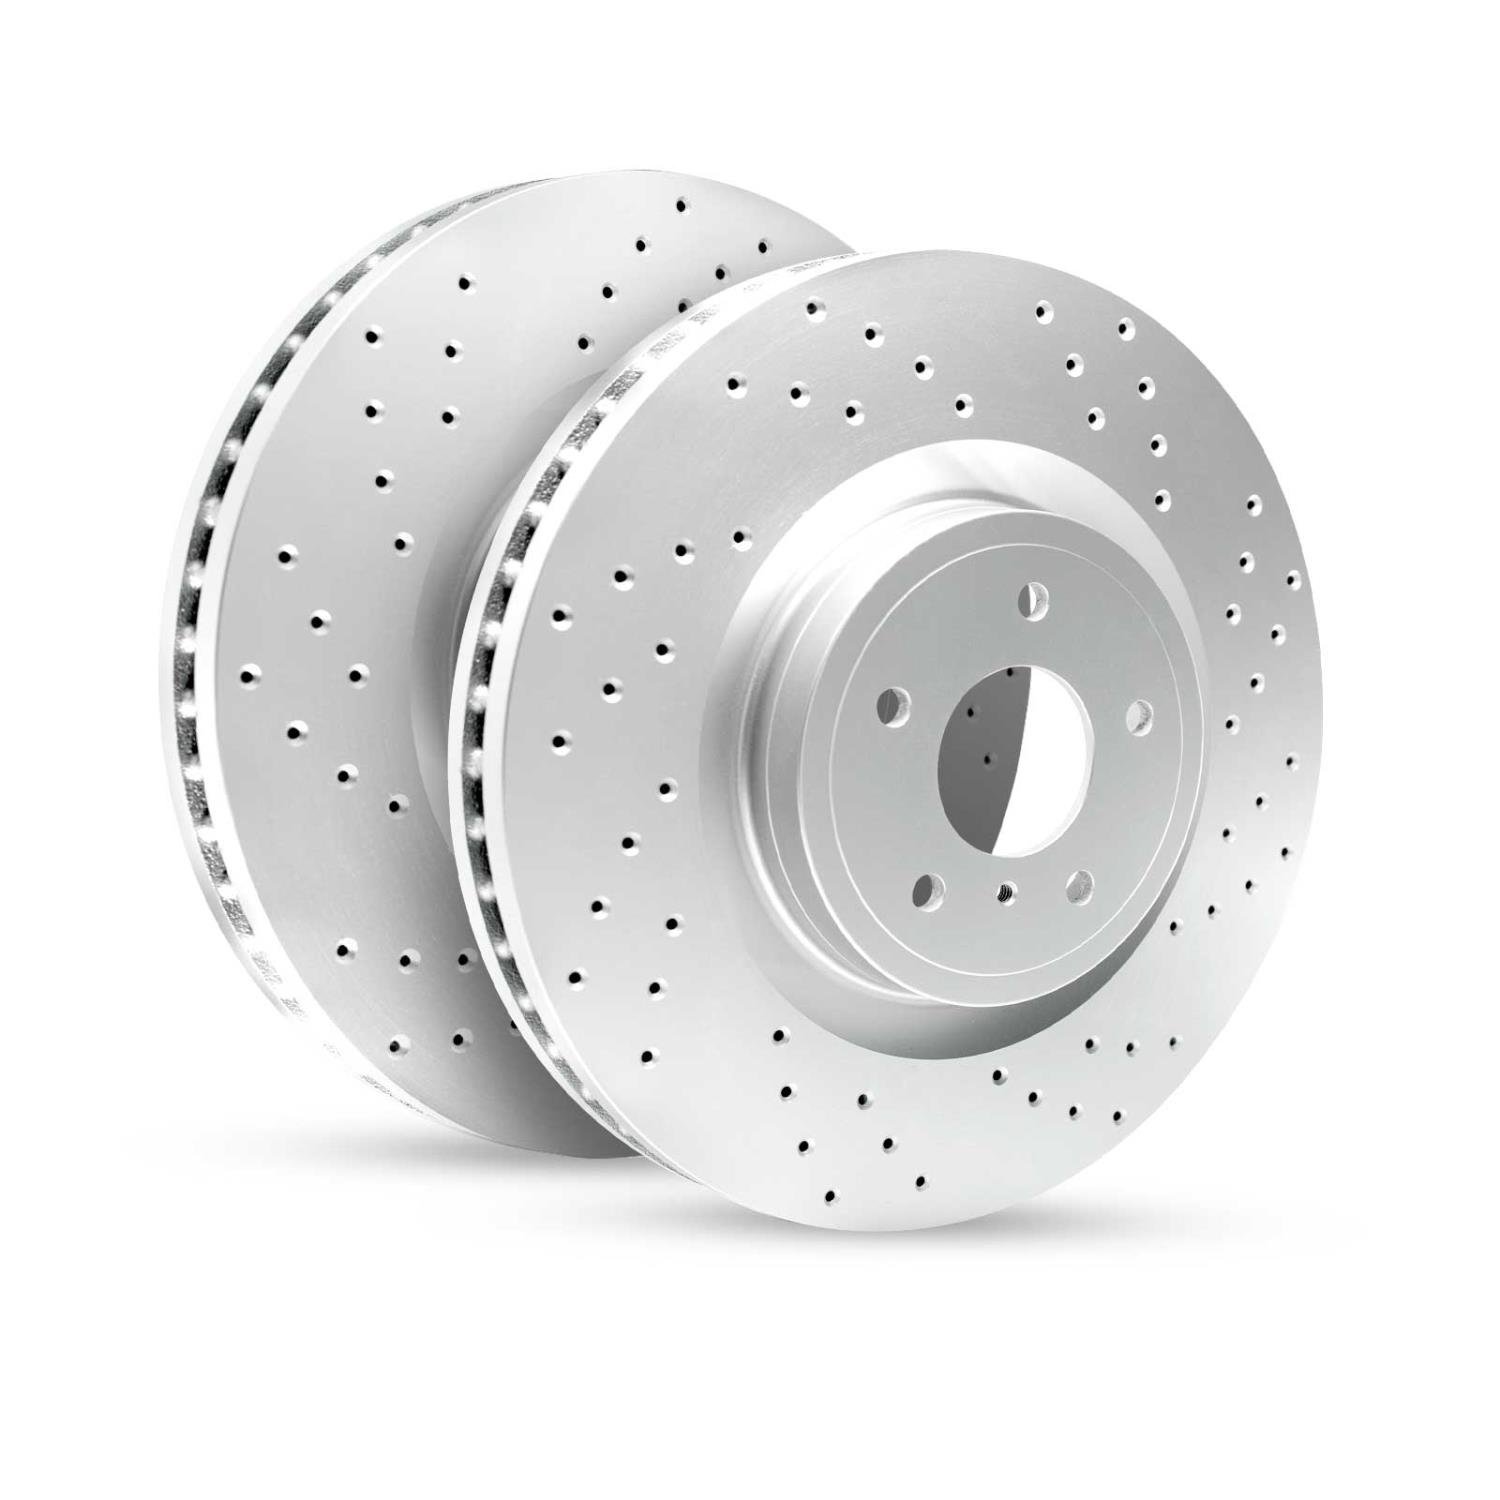 GEO-Carbon Drilled/Slotted Rotors, Fits Select Ford/Mazda,